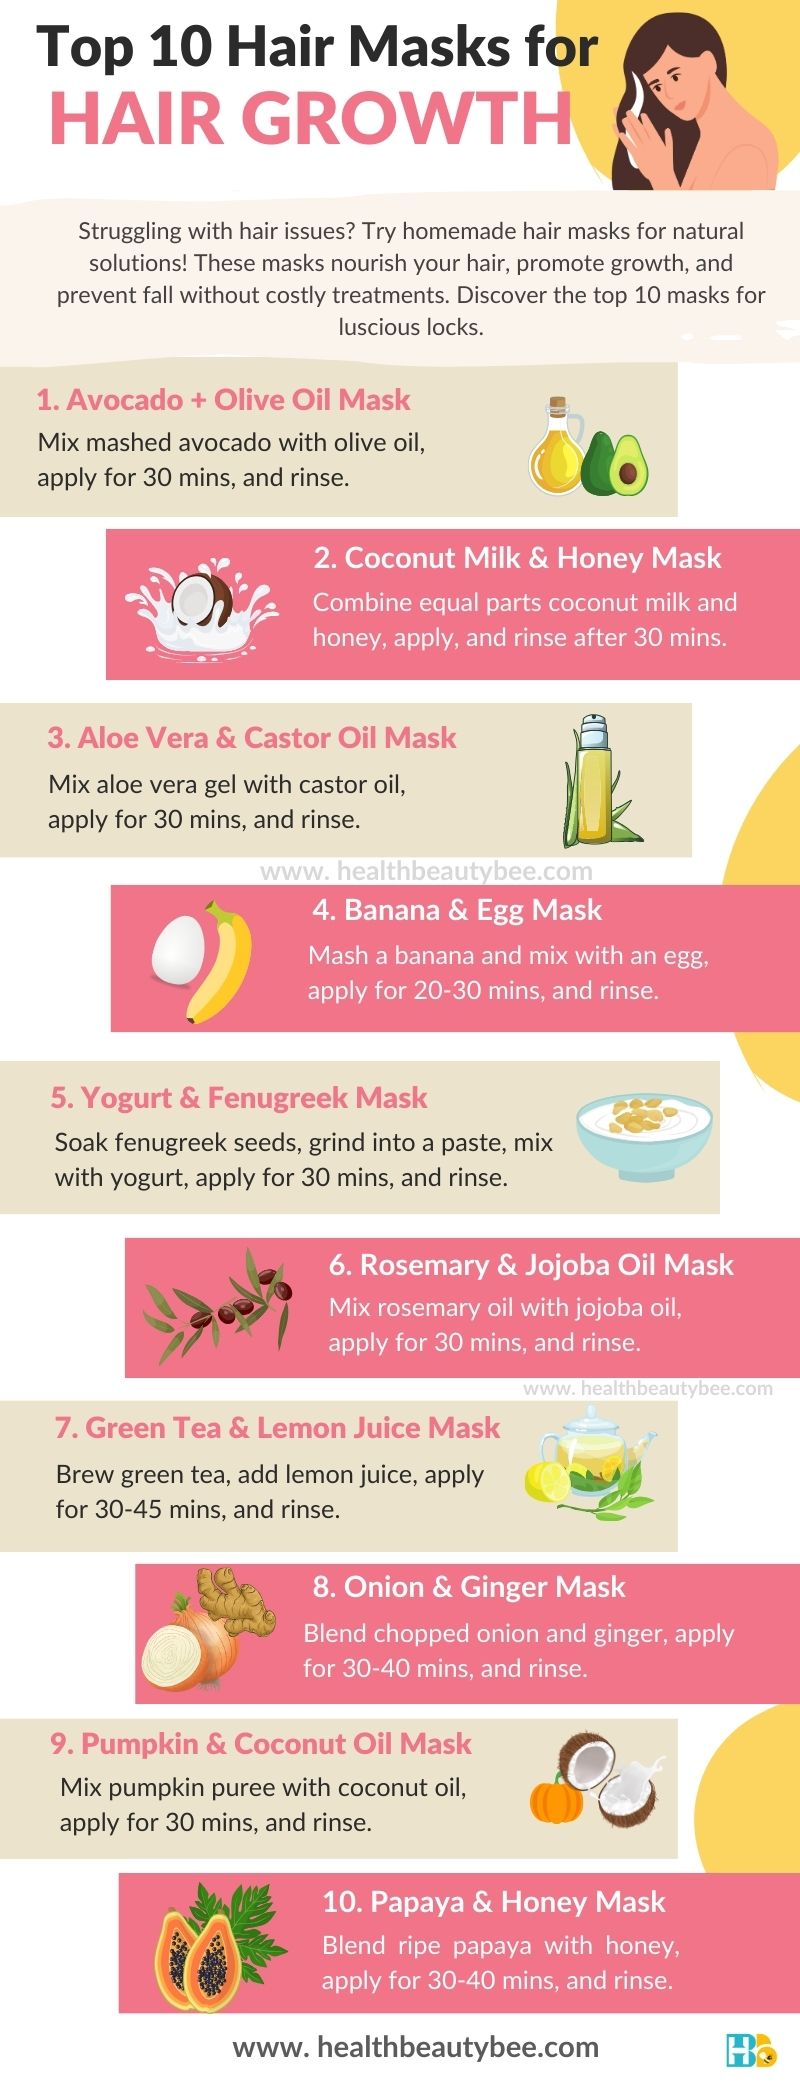 10 hair masks for hair growth infographic healthbeautybee